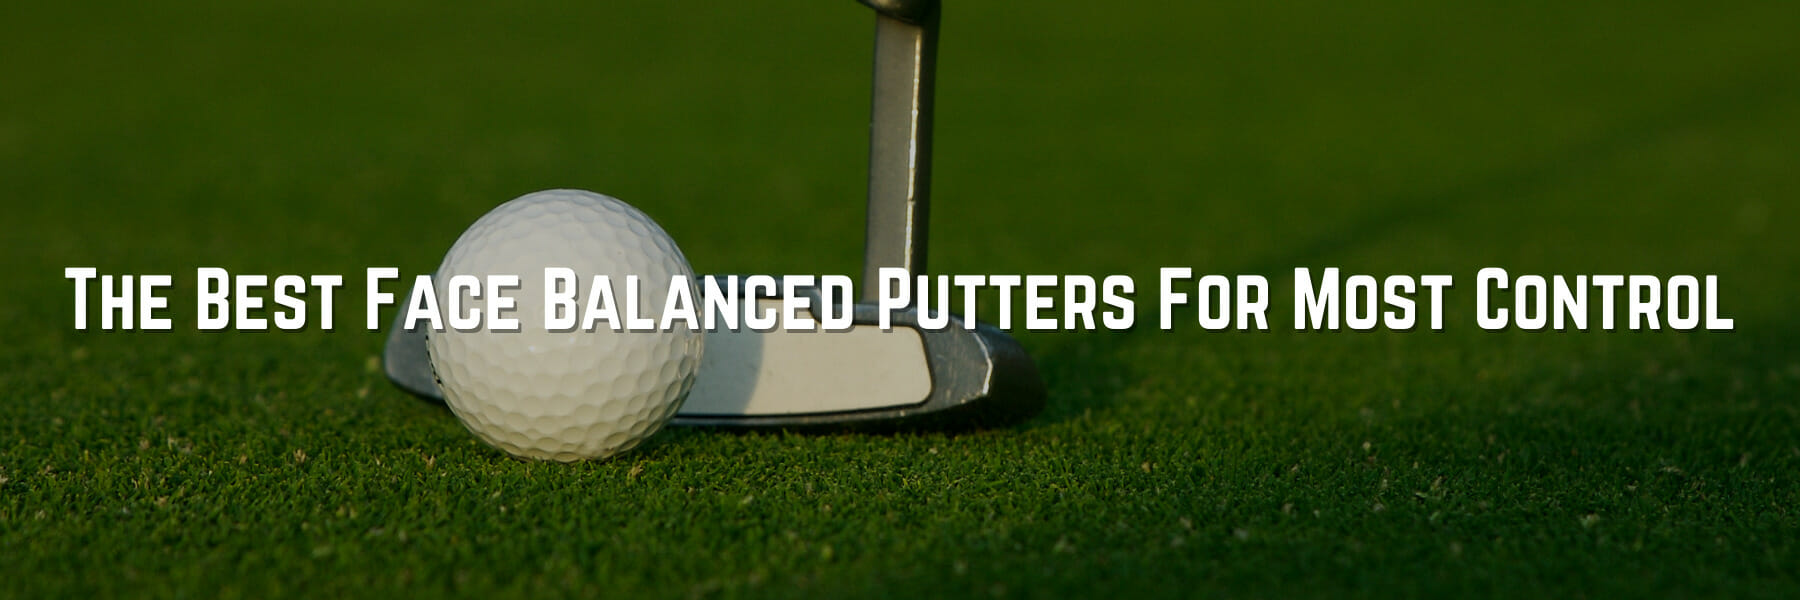 The Best Face Balanced Putters For Most Control